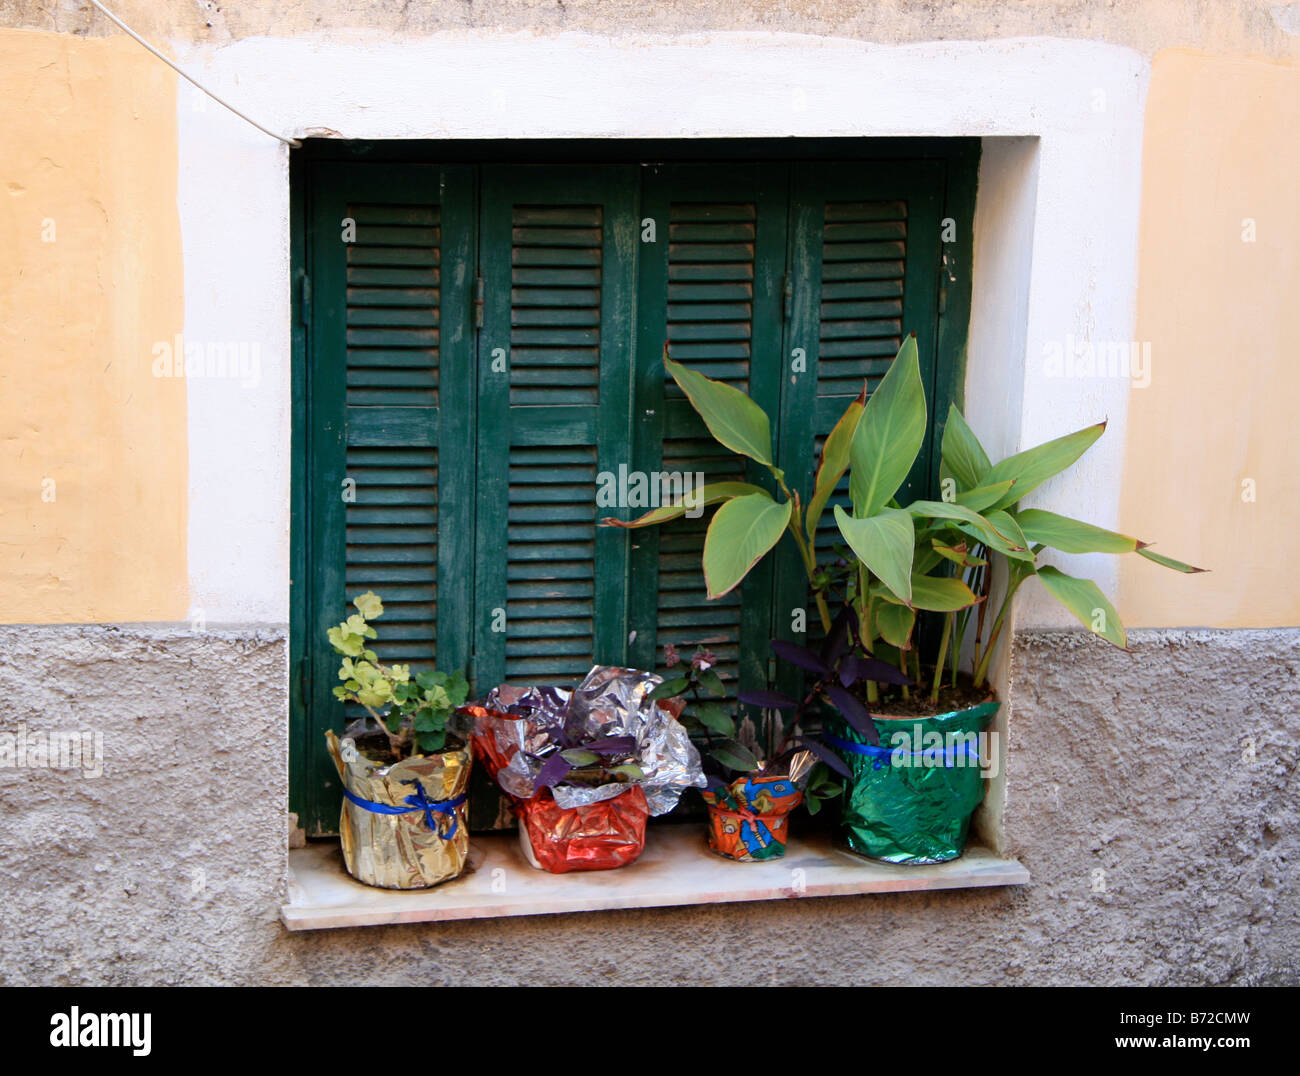 row of plant pots against green shutters Stock Photo